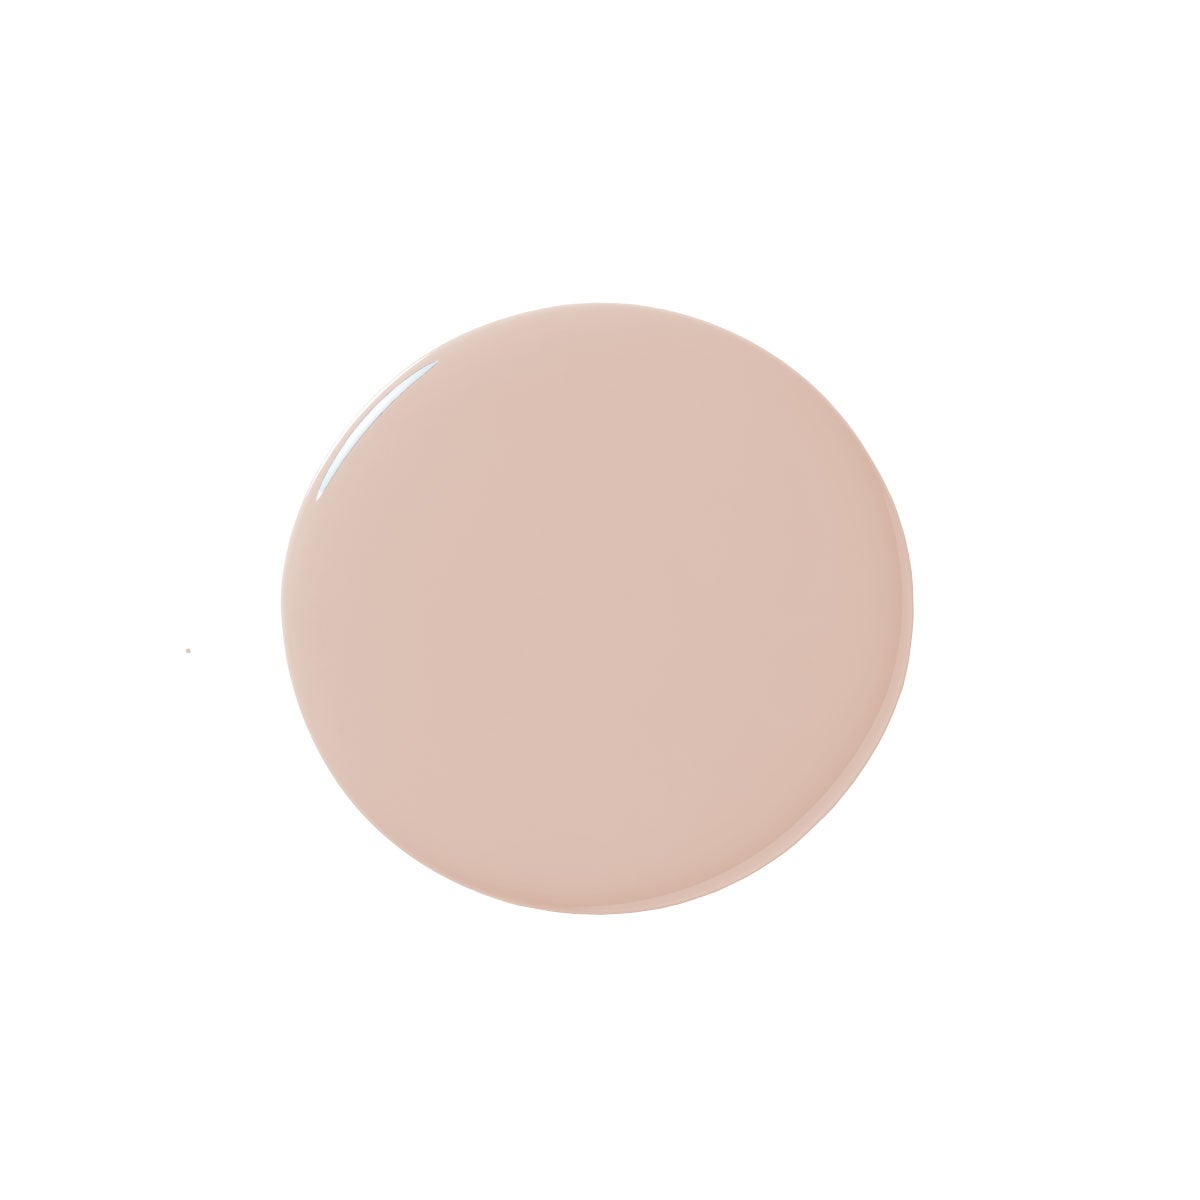 Blush Pink Paint Blob by Clare